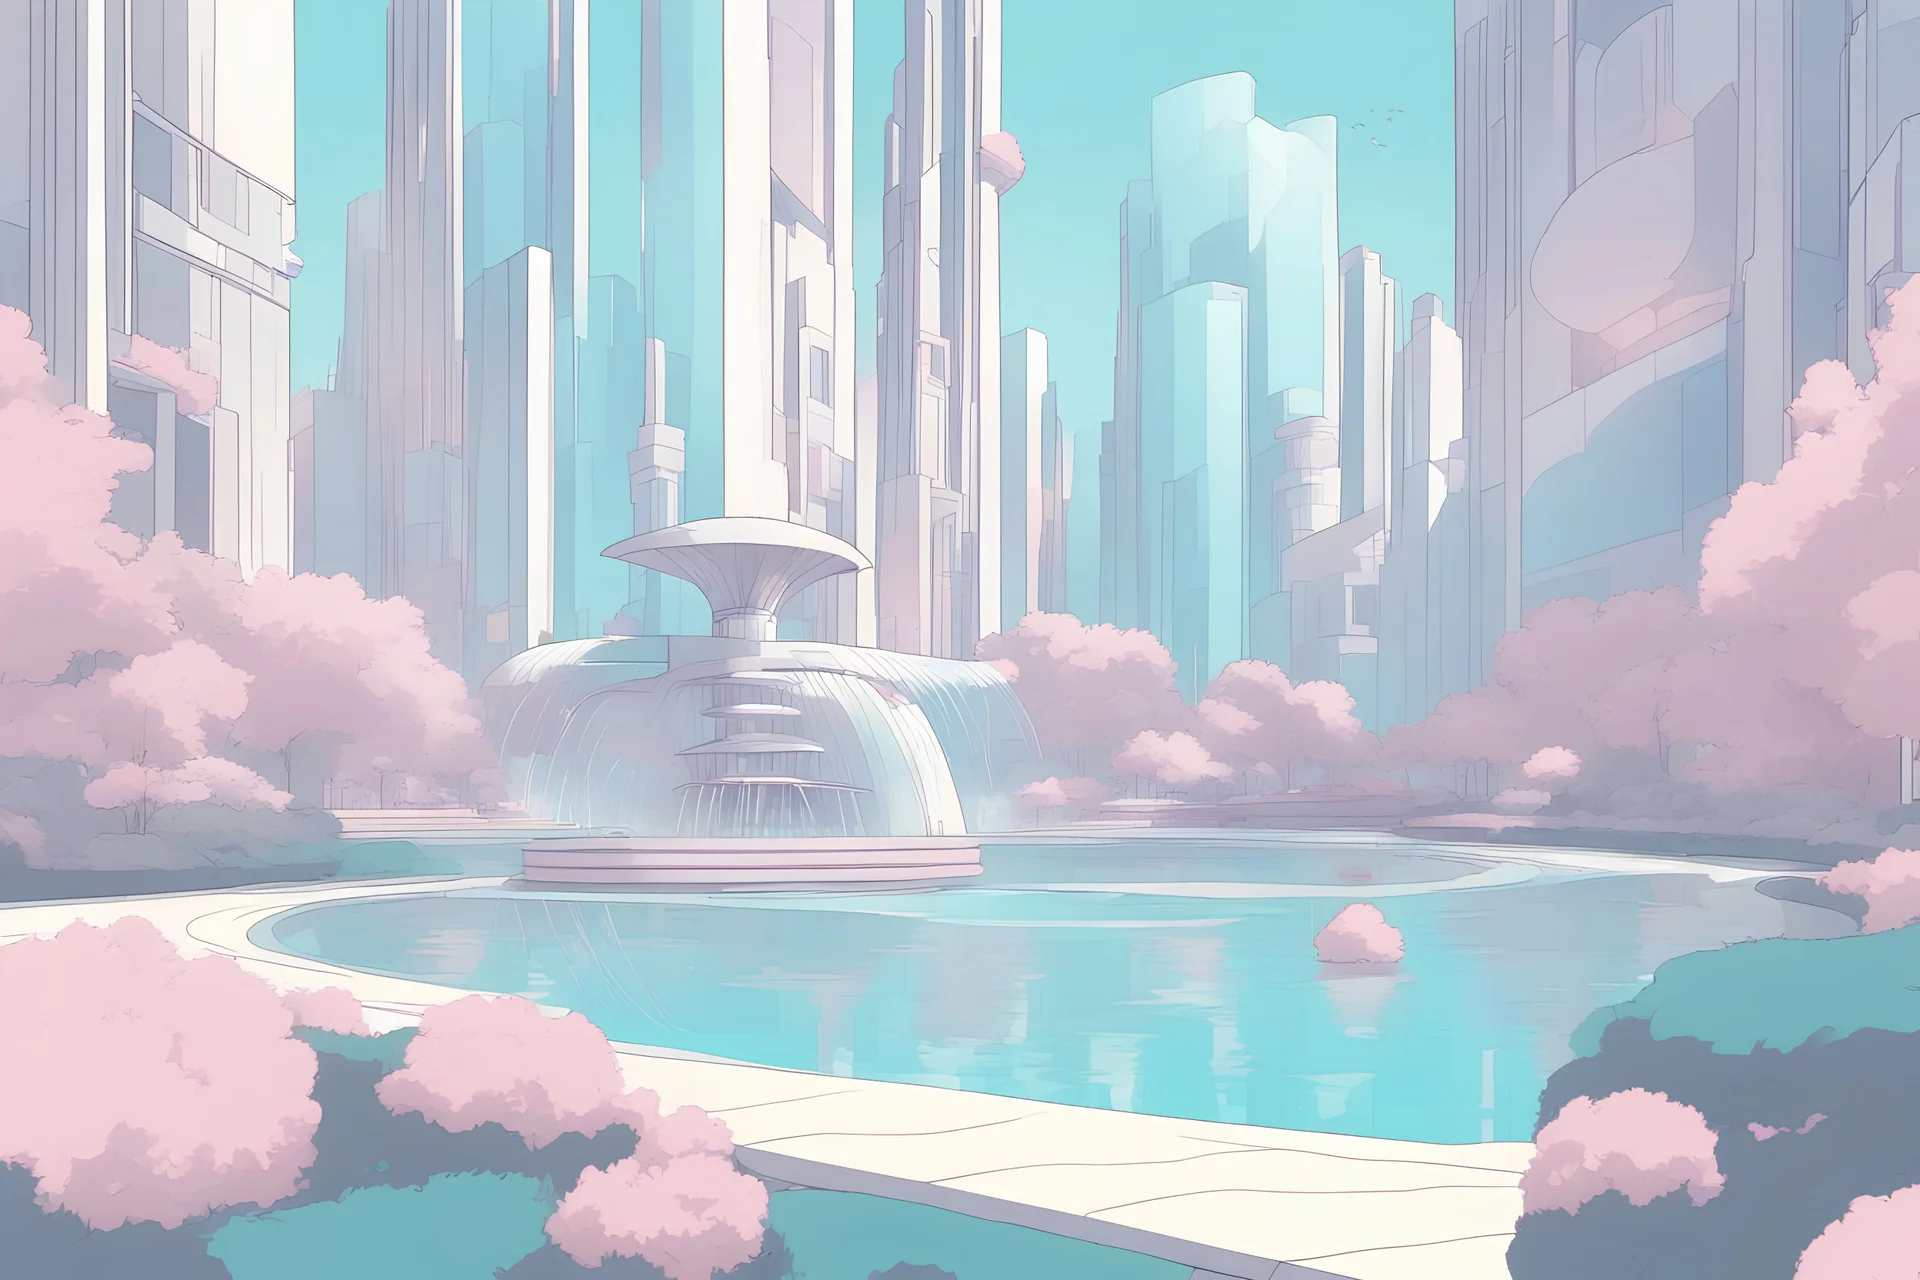 in a futuristic city, very modern with bright pastel colors, fearful, magnificent buildings with fountains and ponds.